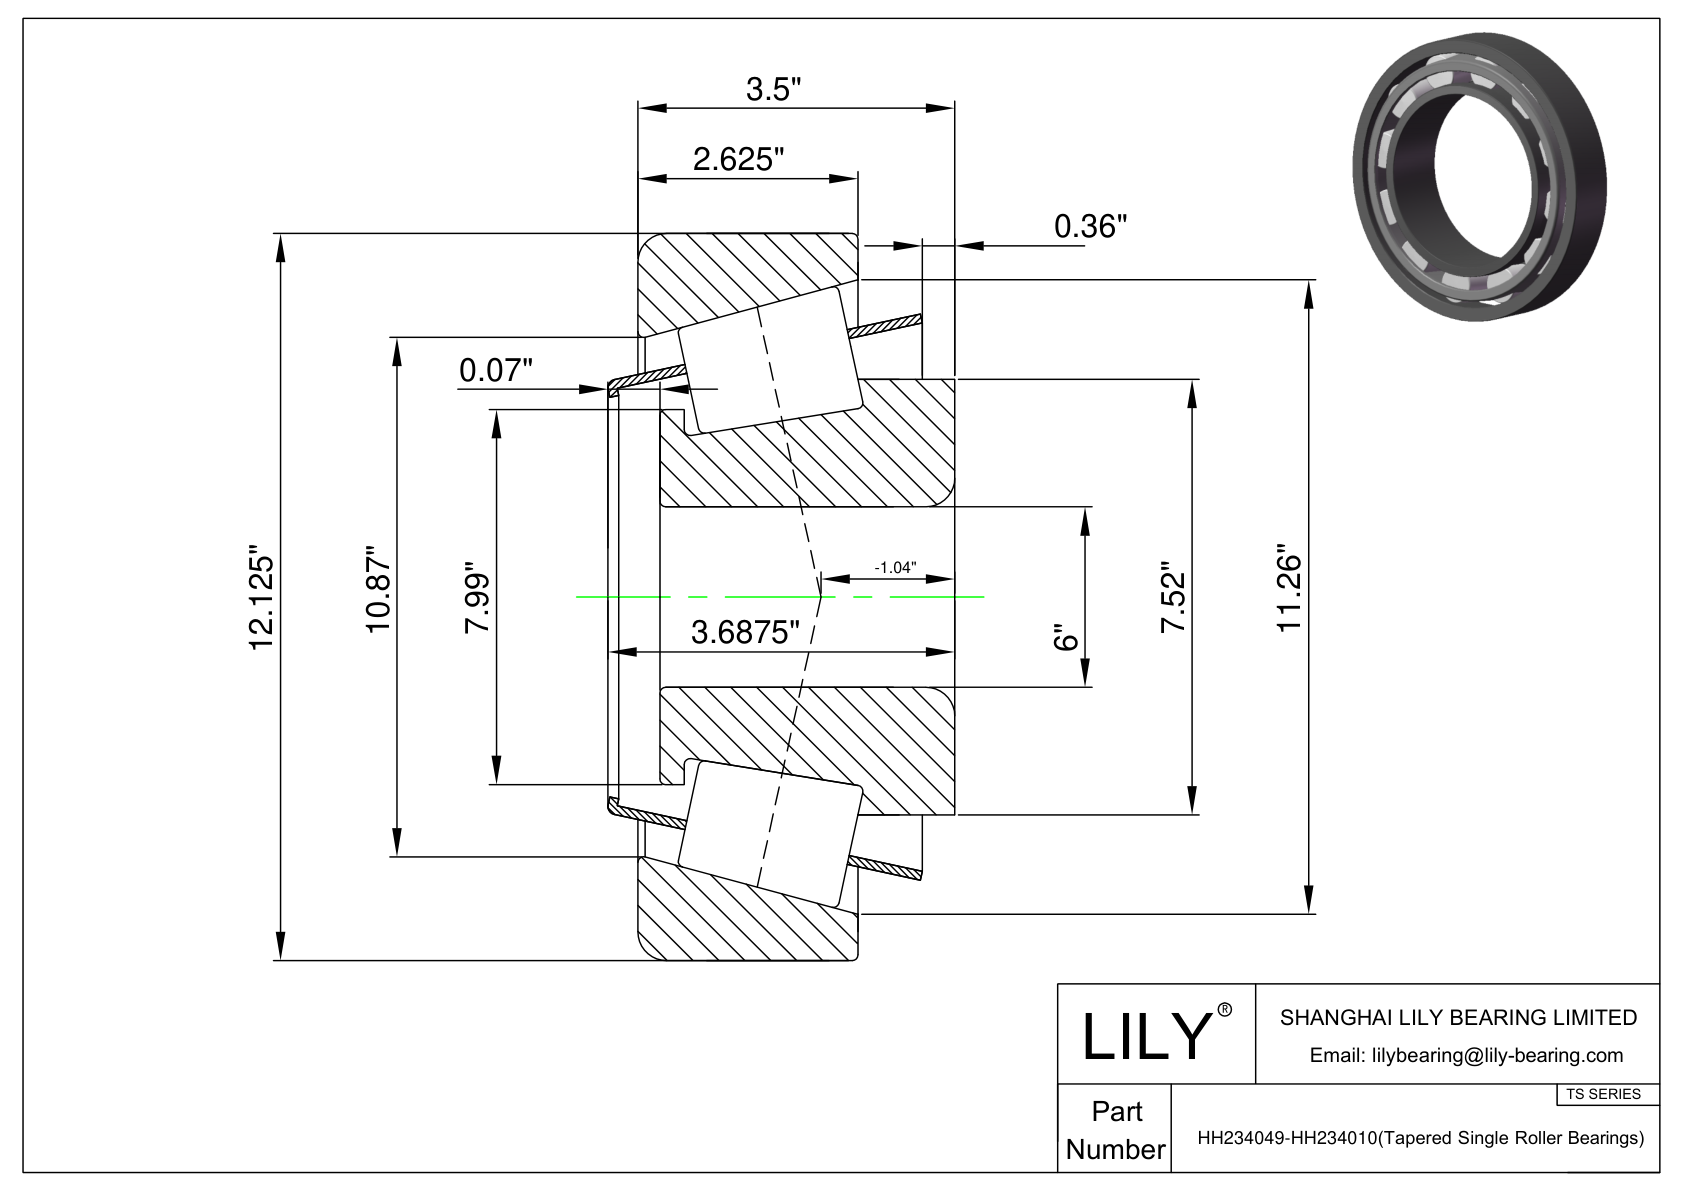 HH234049-HH234010 TS (Tapered Single Roller Bearings) (Imperial) cad drawing